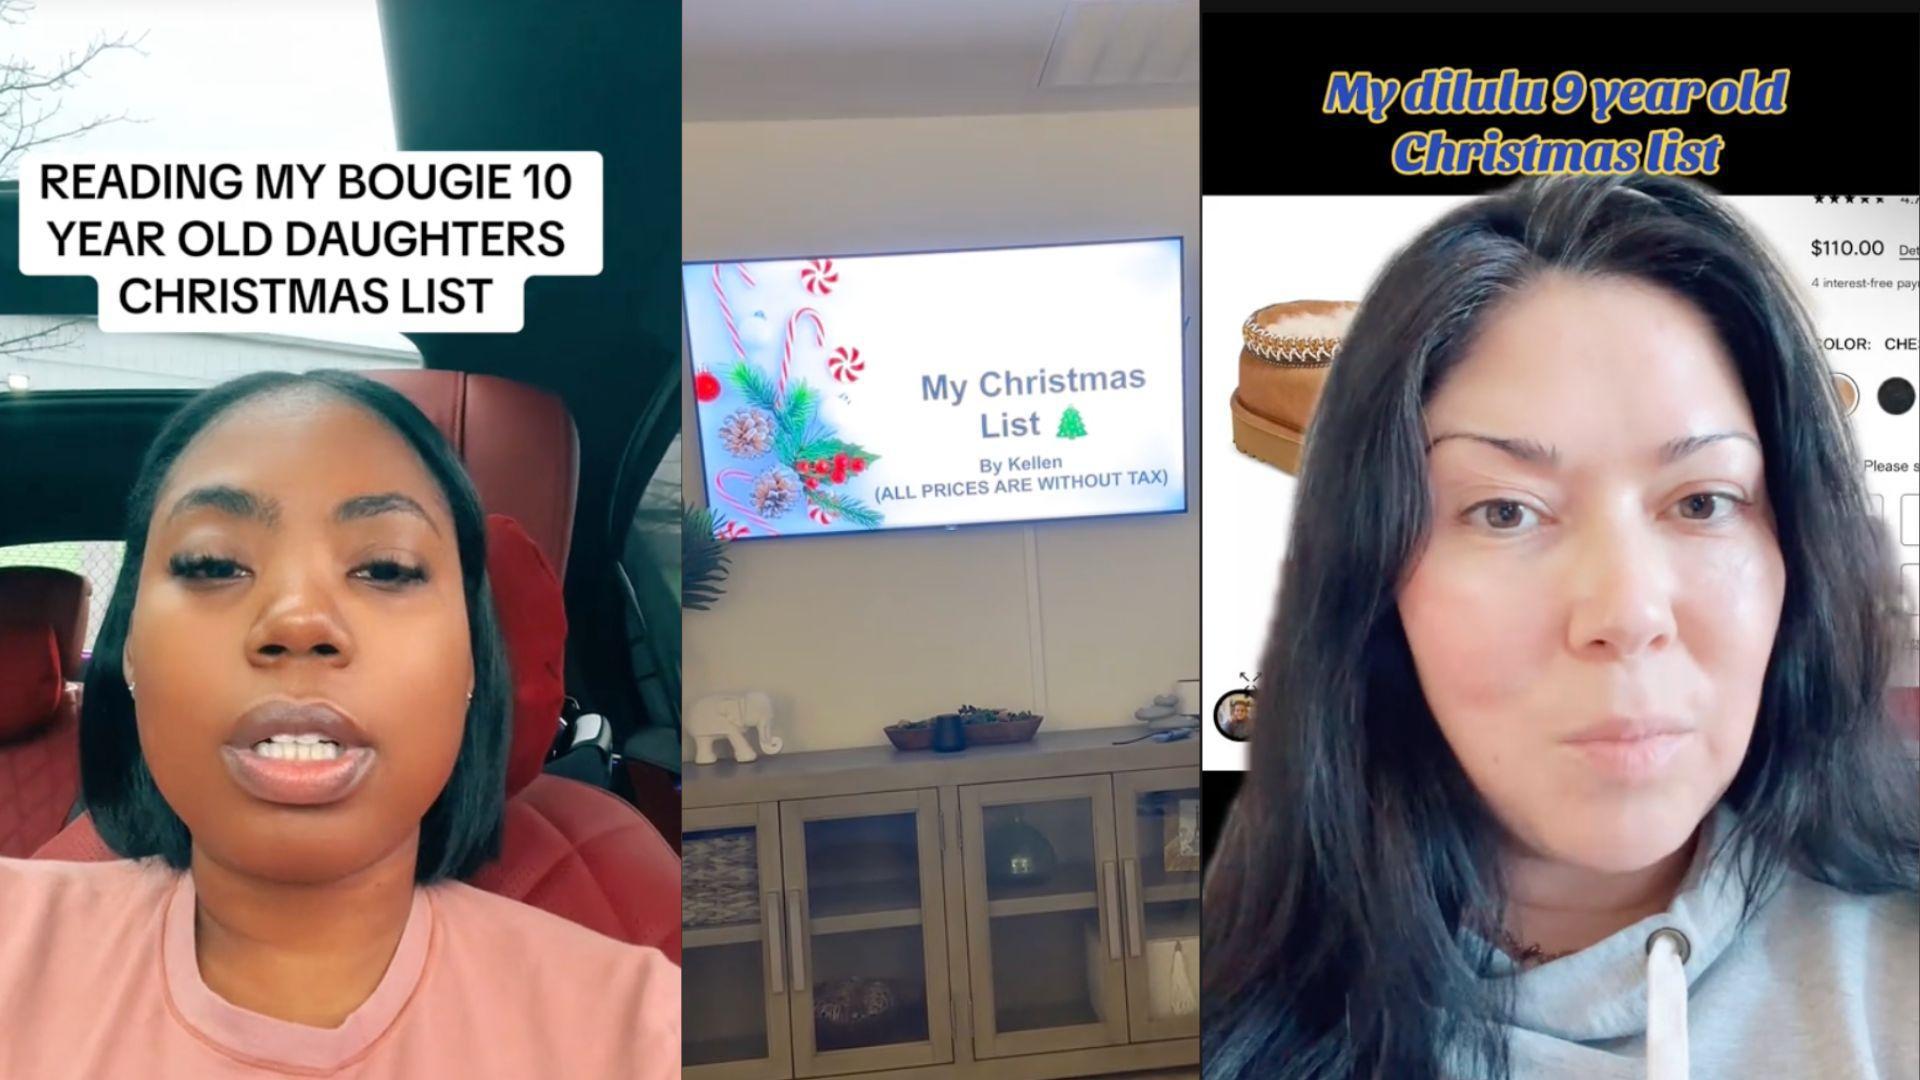 A collage of three images showing parents sharing their children's Christmas wish lists on social media. On the left, a woman in a car appears to speak into the camera with a caption about reading her daughter's high-end list. In the center, a television screen displays a child's festive Christmas list titled "My Christmas List" by Kellen. On the right, another woman looks into the camera, discussing her nine-year-old's expensive requests